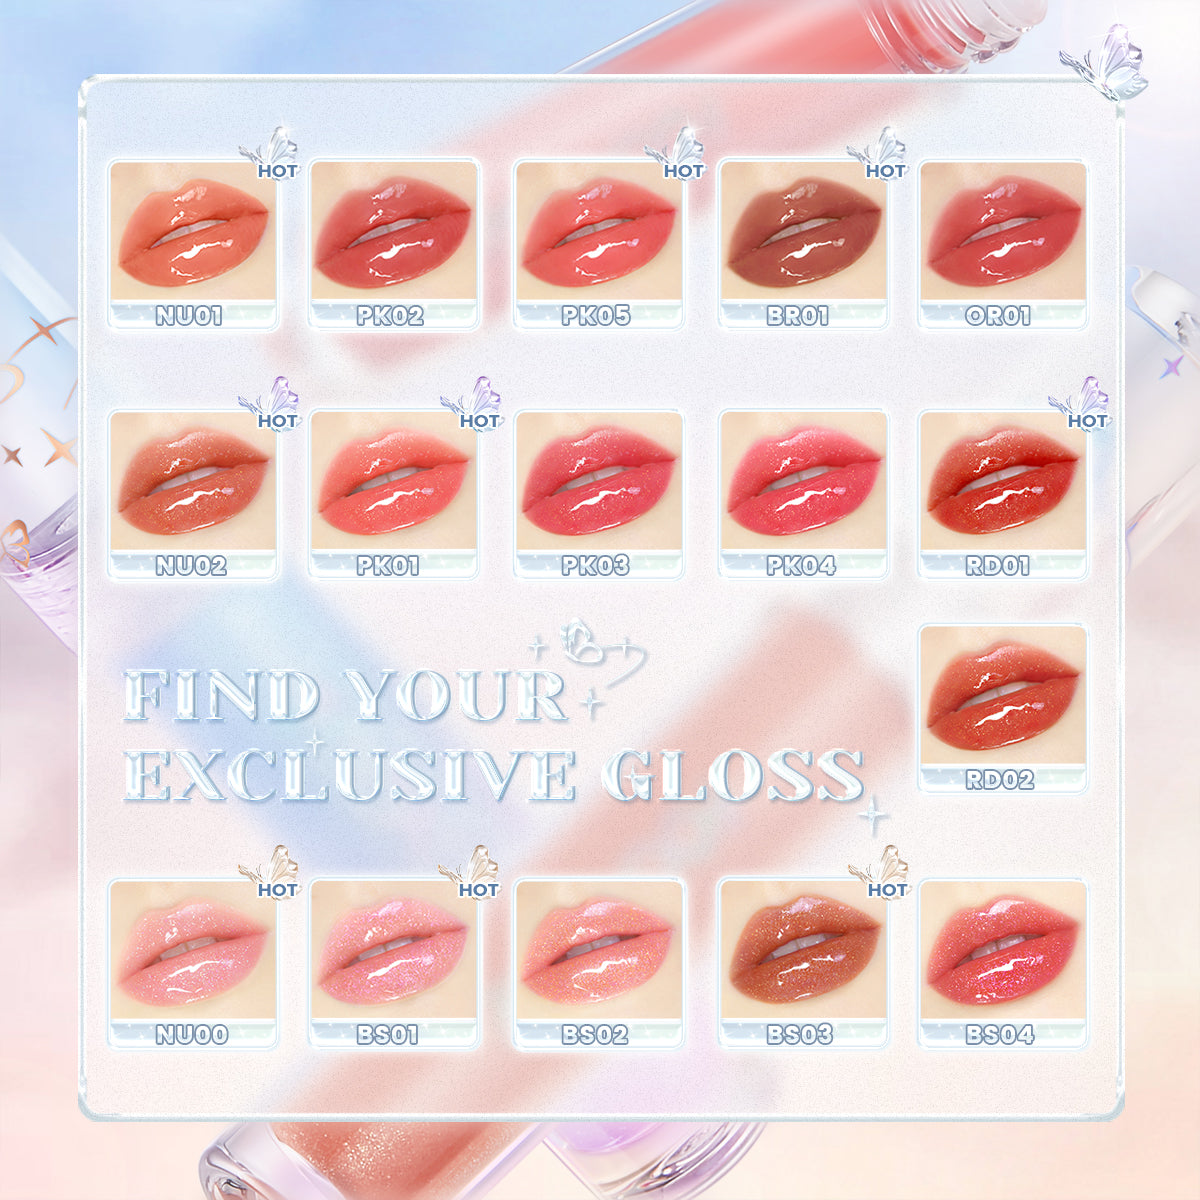 Focallure, Watery Glow Lip gloss,  3 Glossy Styles, 16 Colors